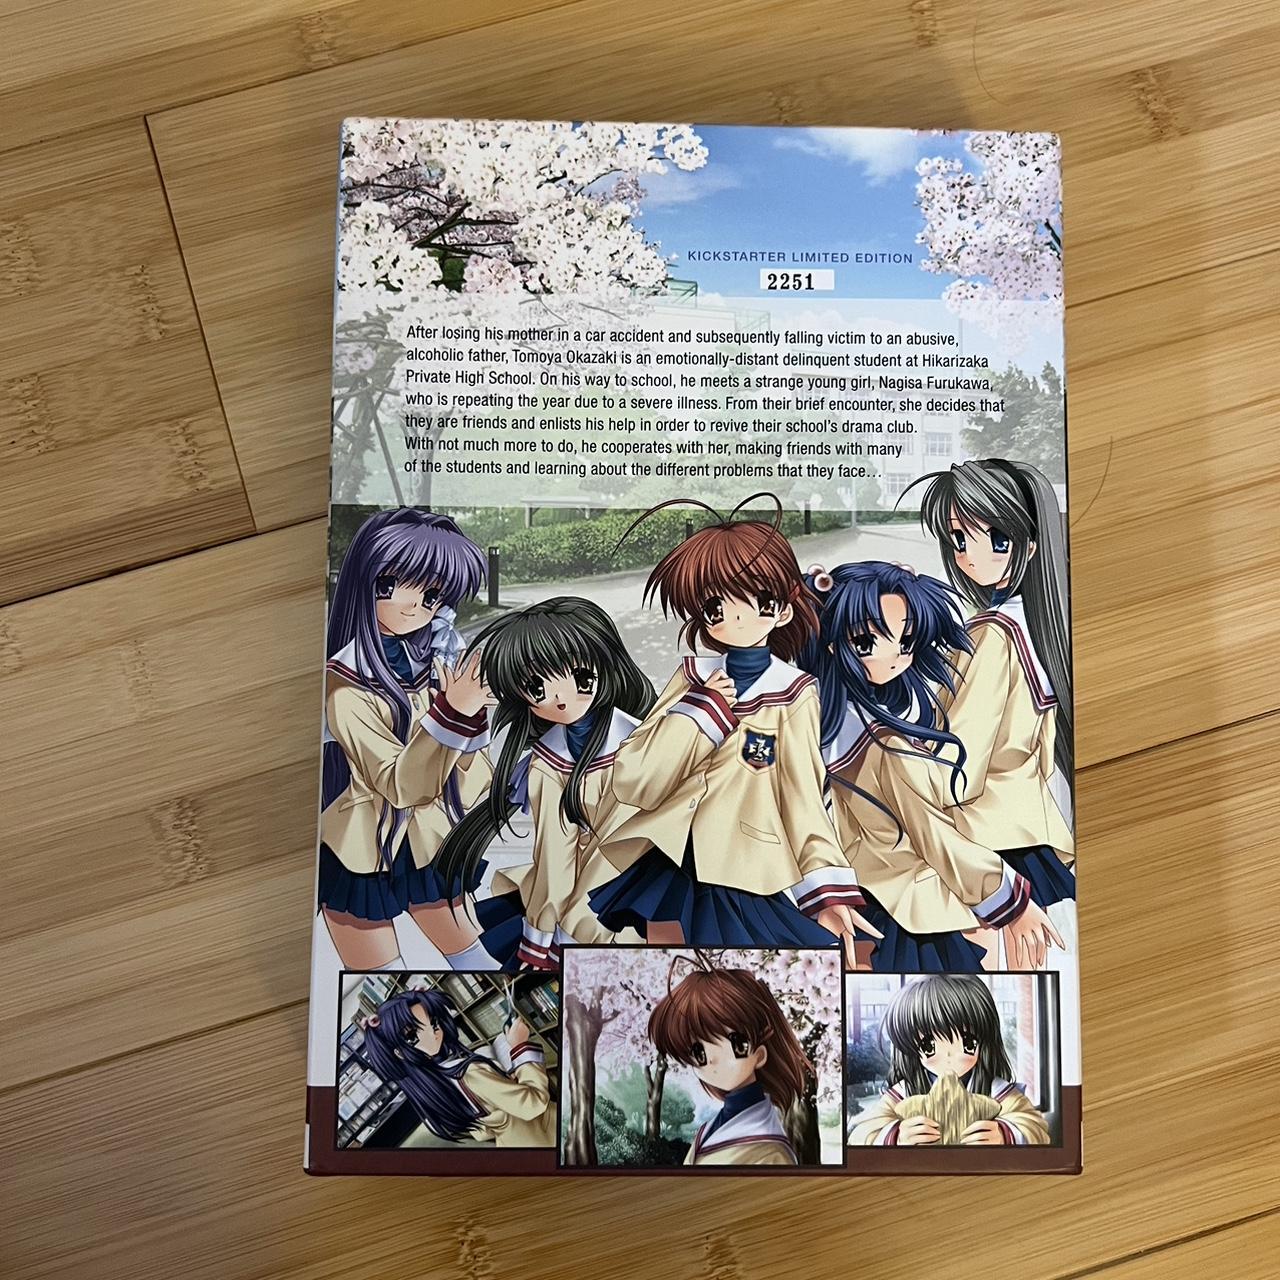 Clannad visual novel game. From the limited edition